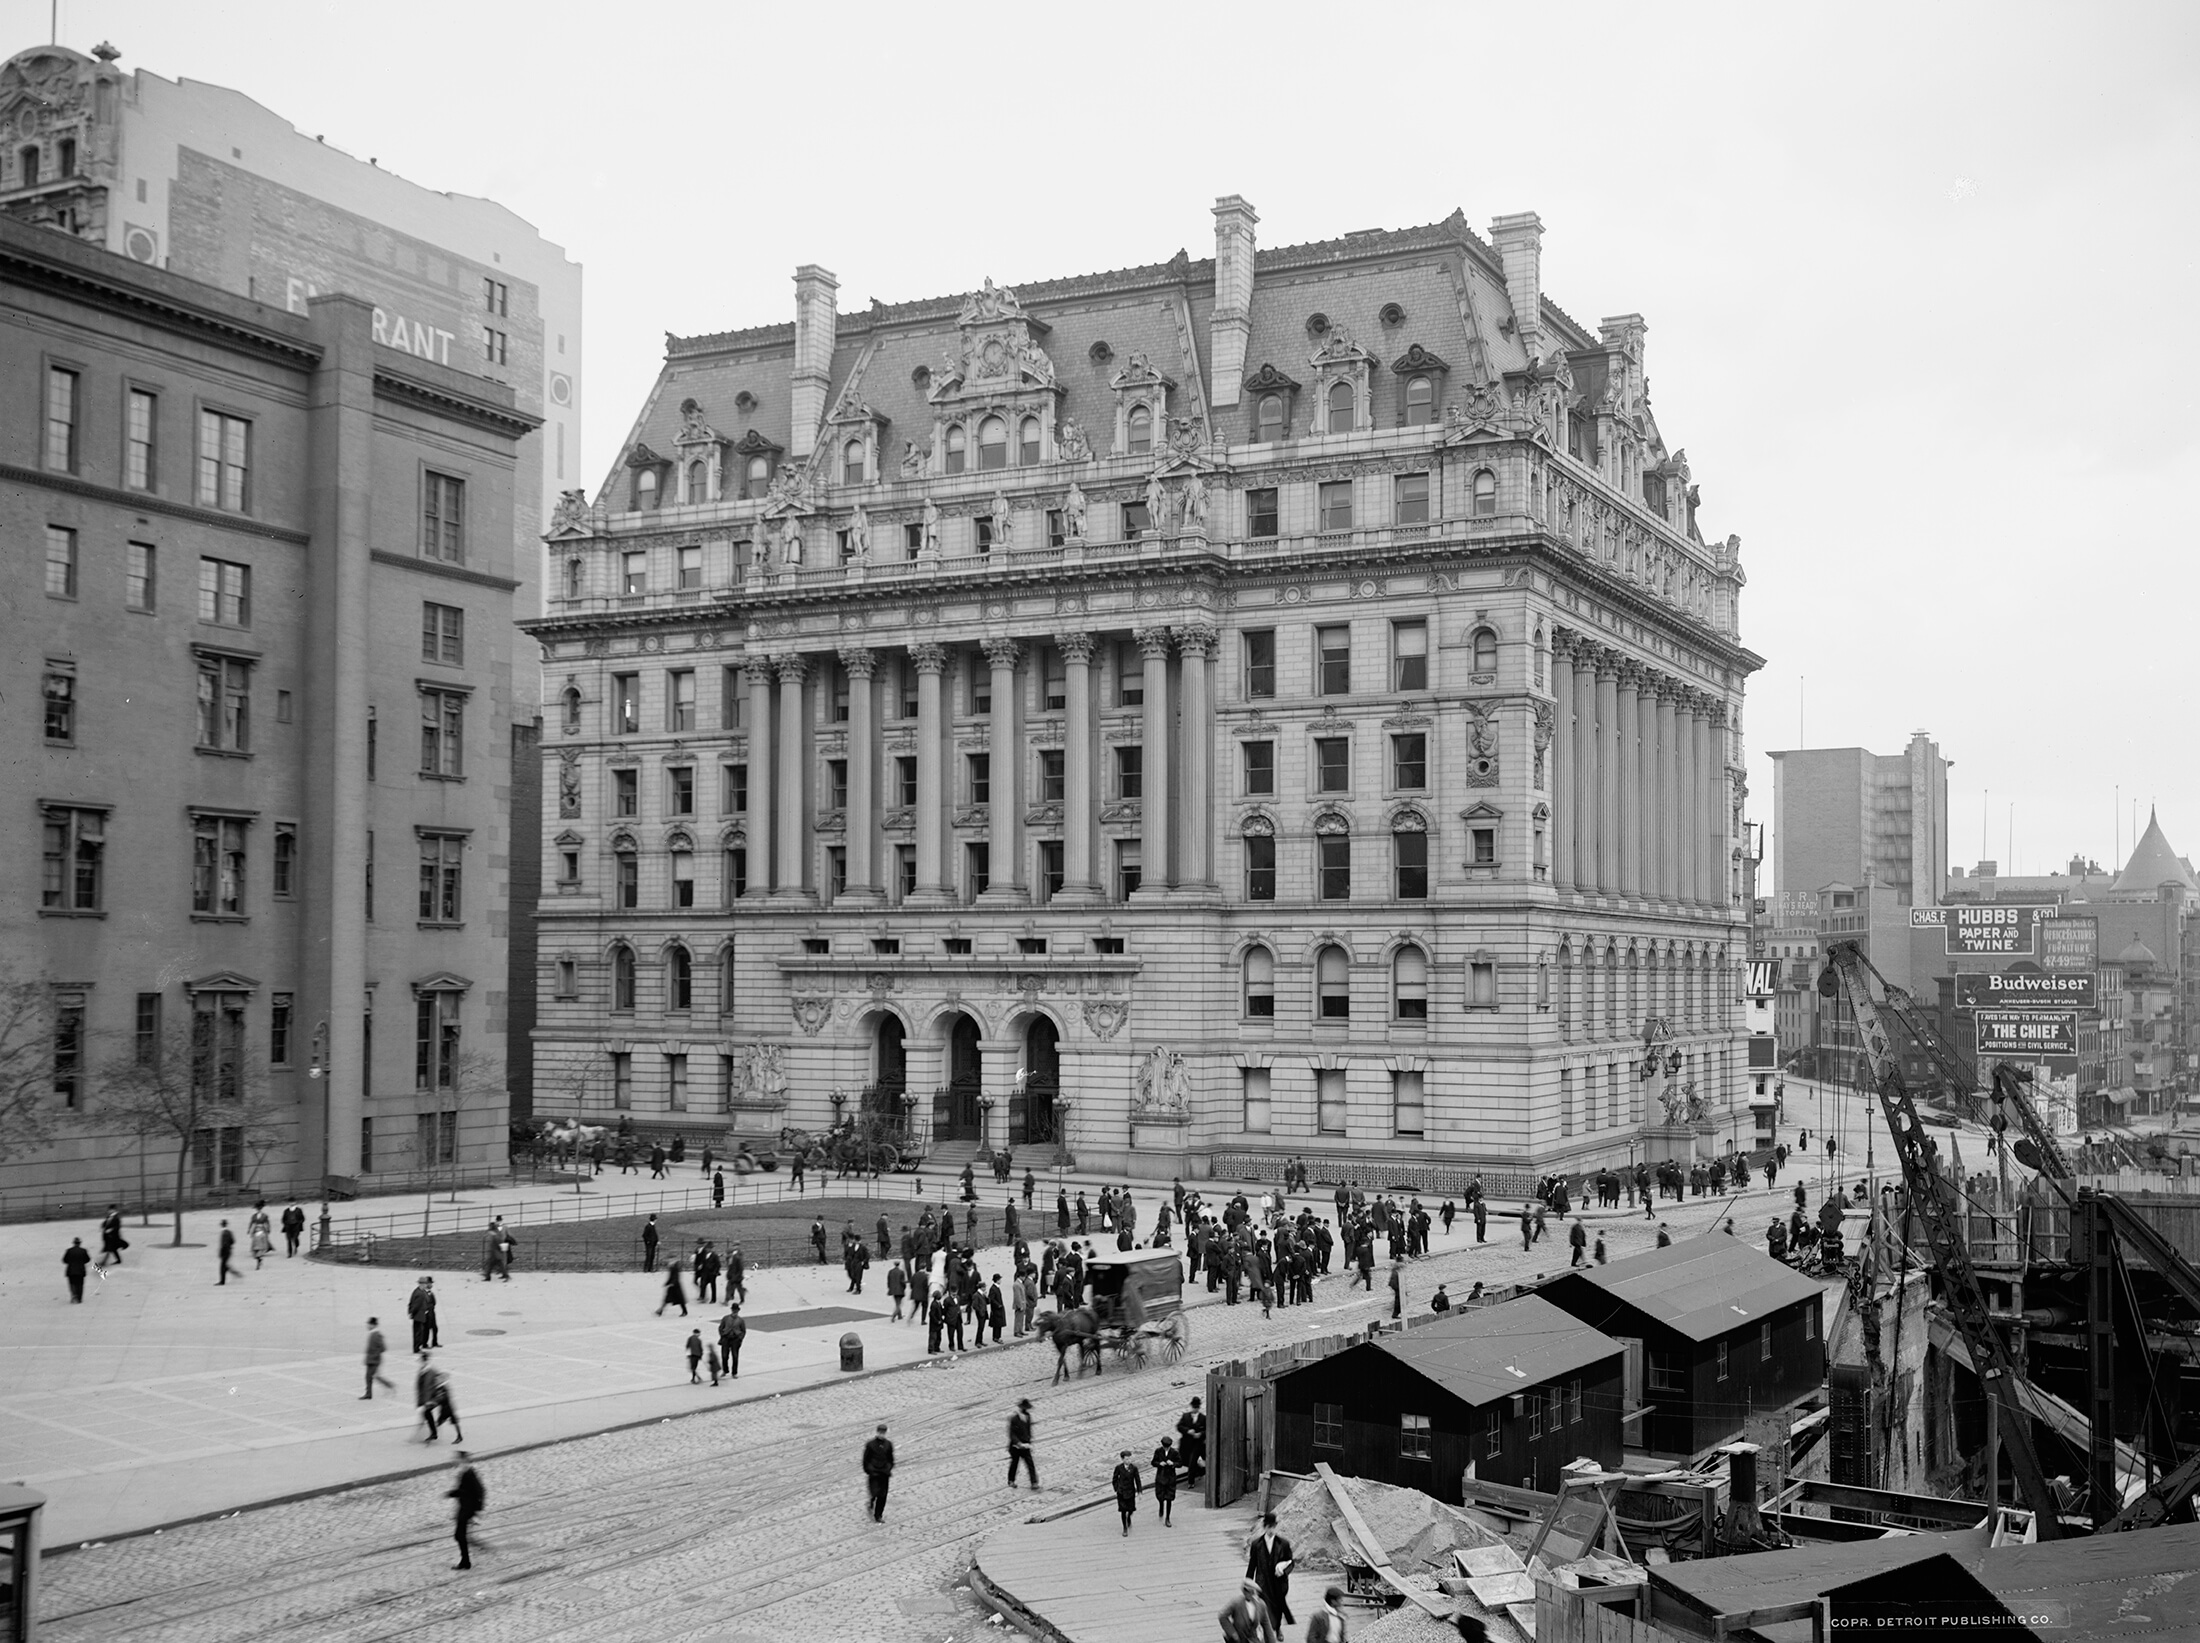 a black and white photo of the building with people walking in front and horse drawn carriages